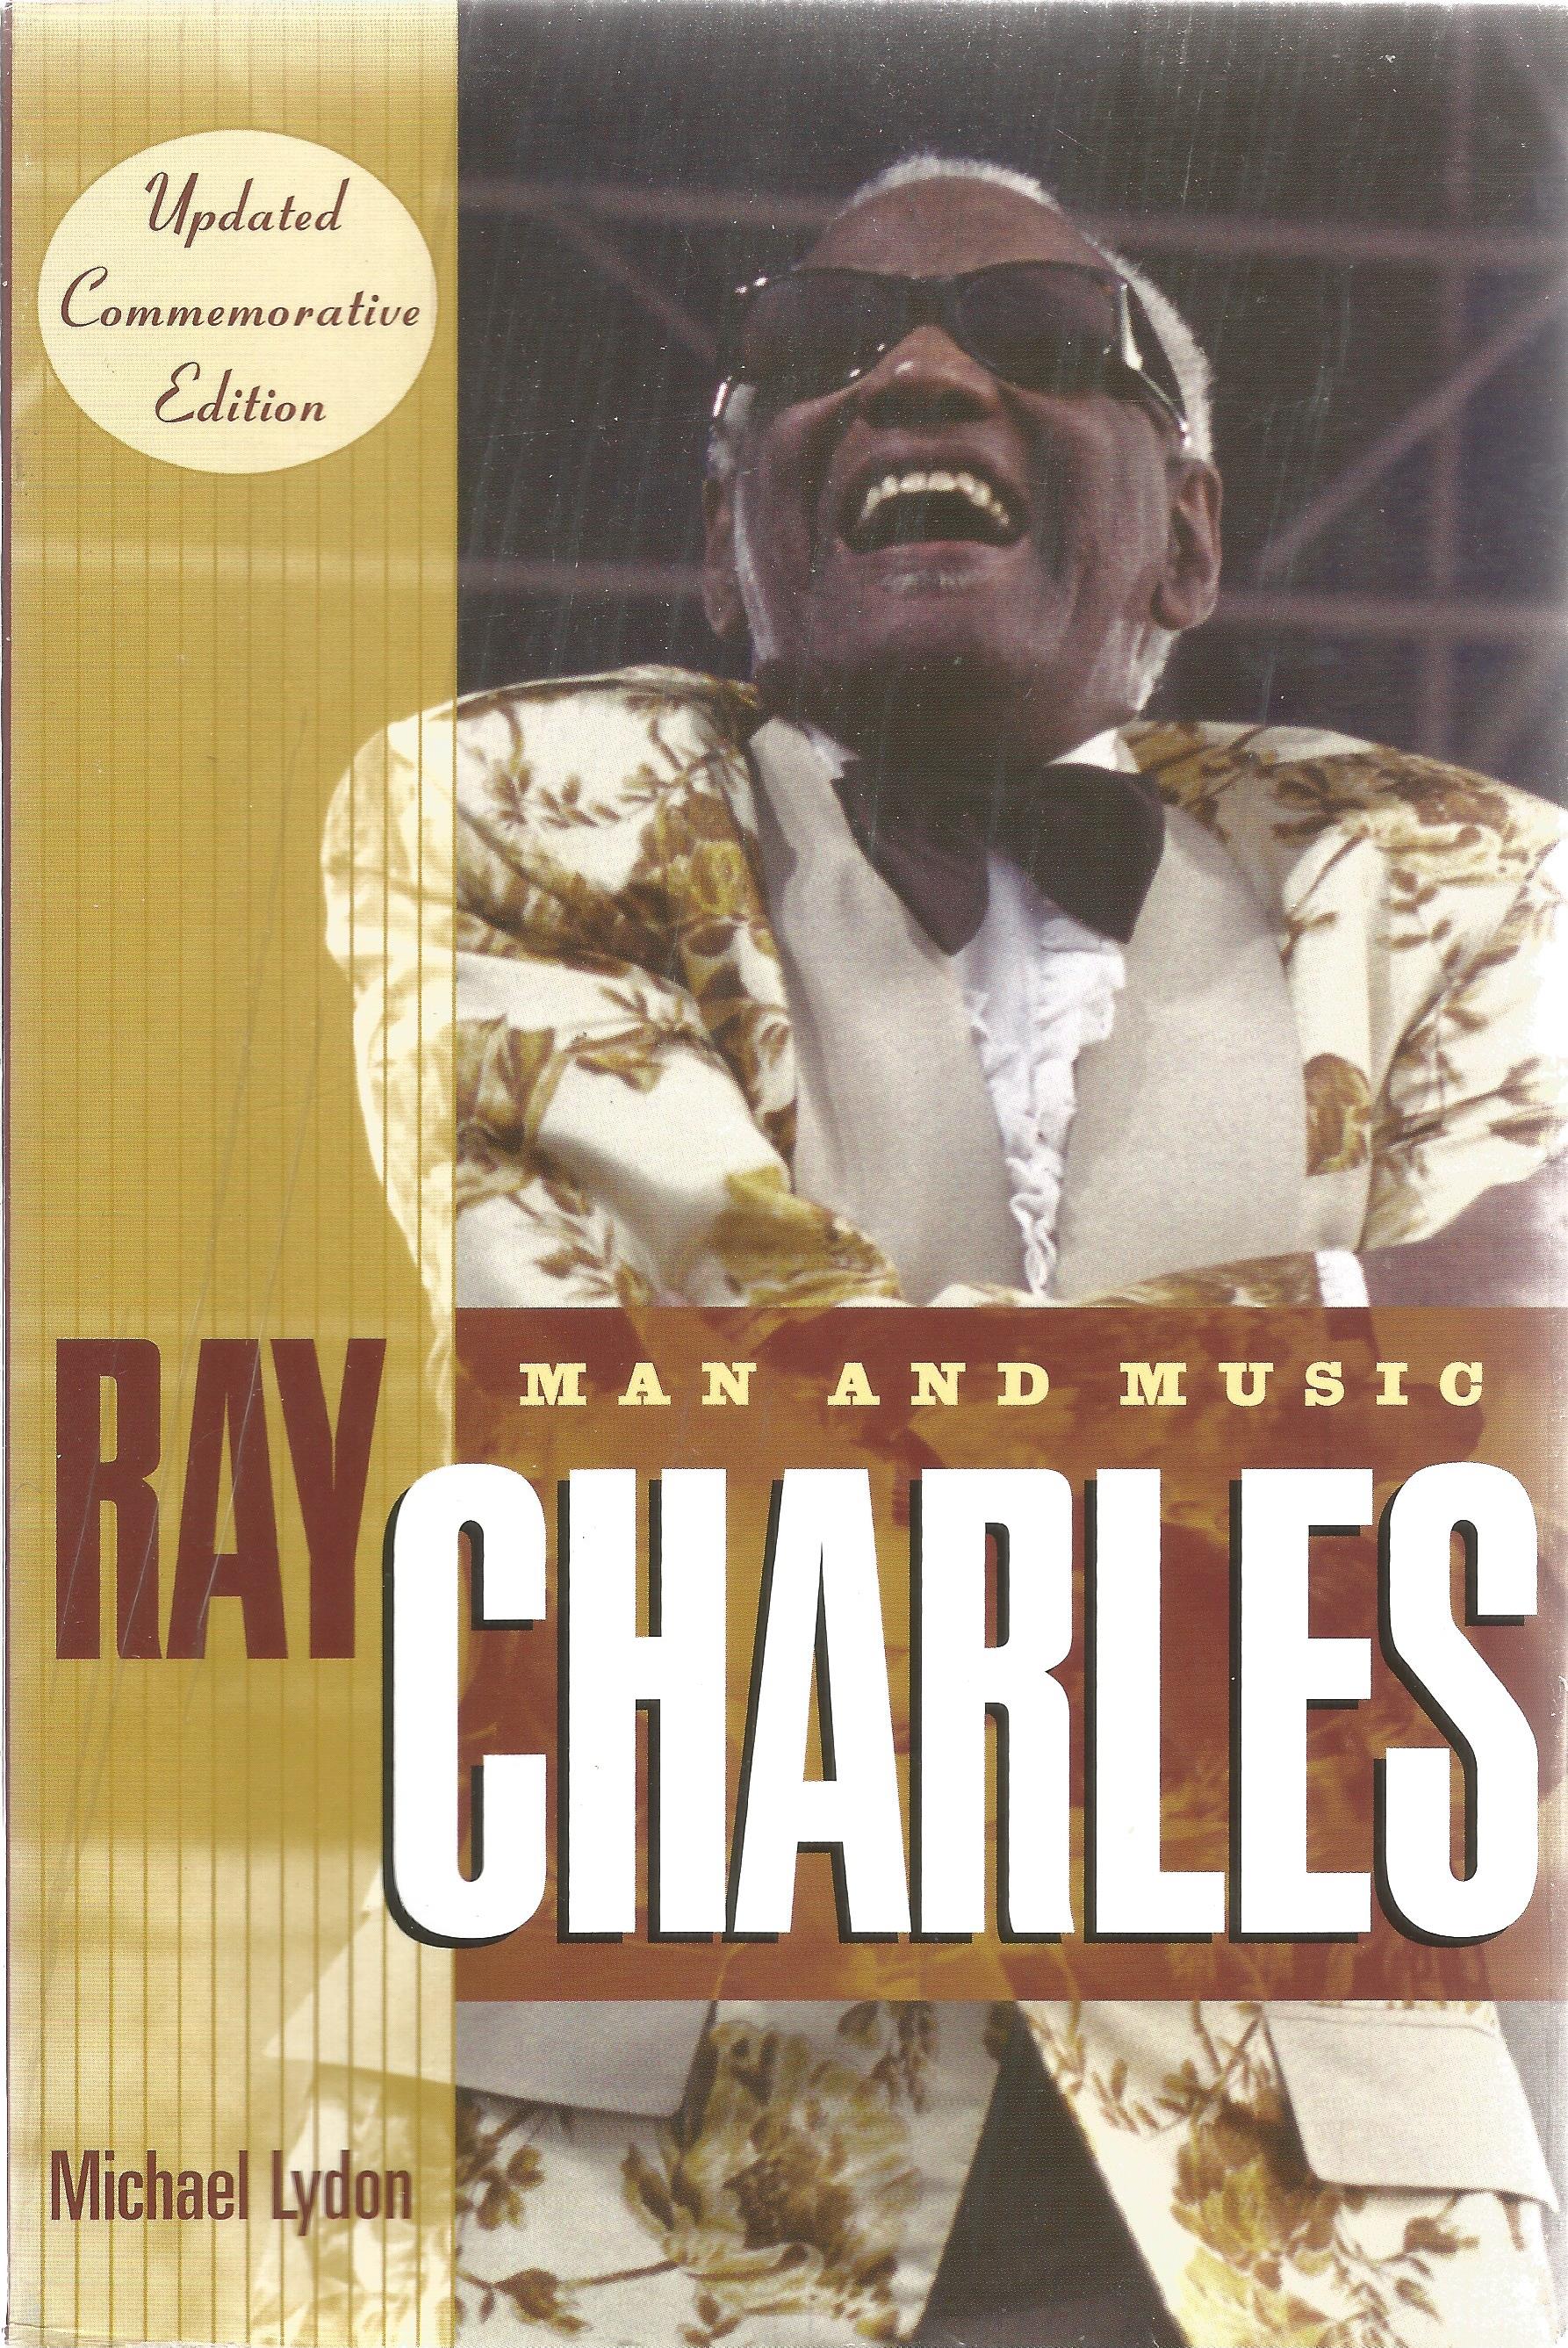 Michael Lydon softback book Ray Charles - Man and Music by Michael Lydon 2004 published by Routledge